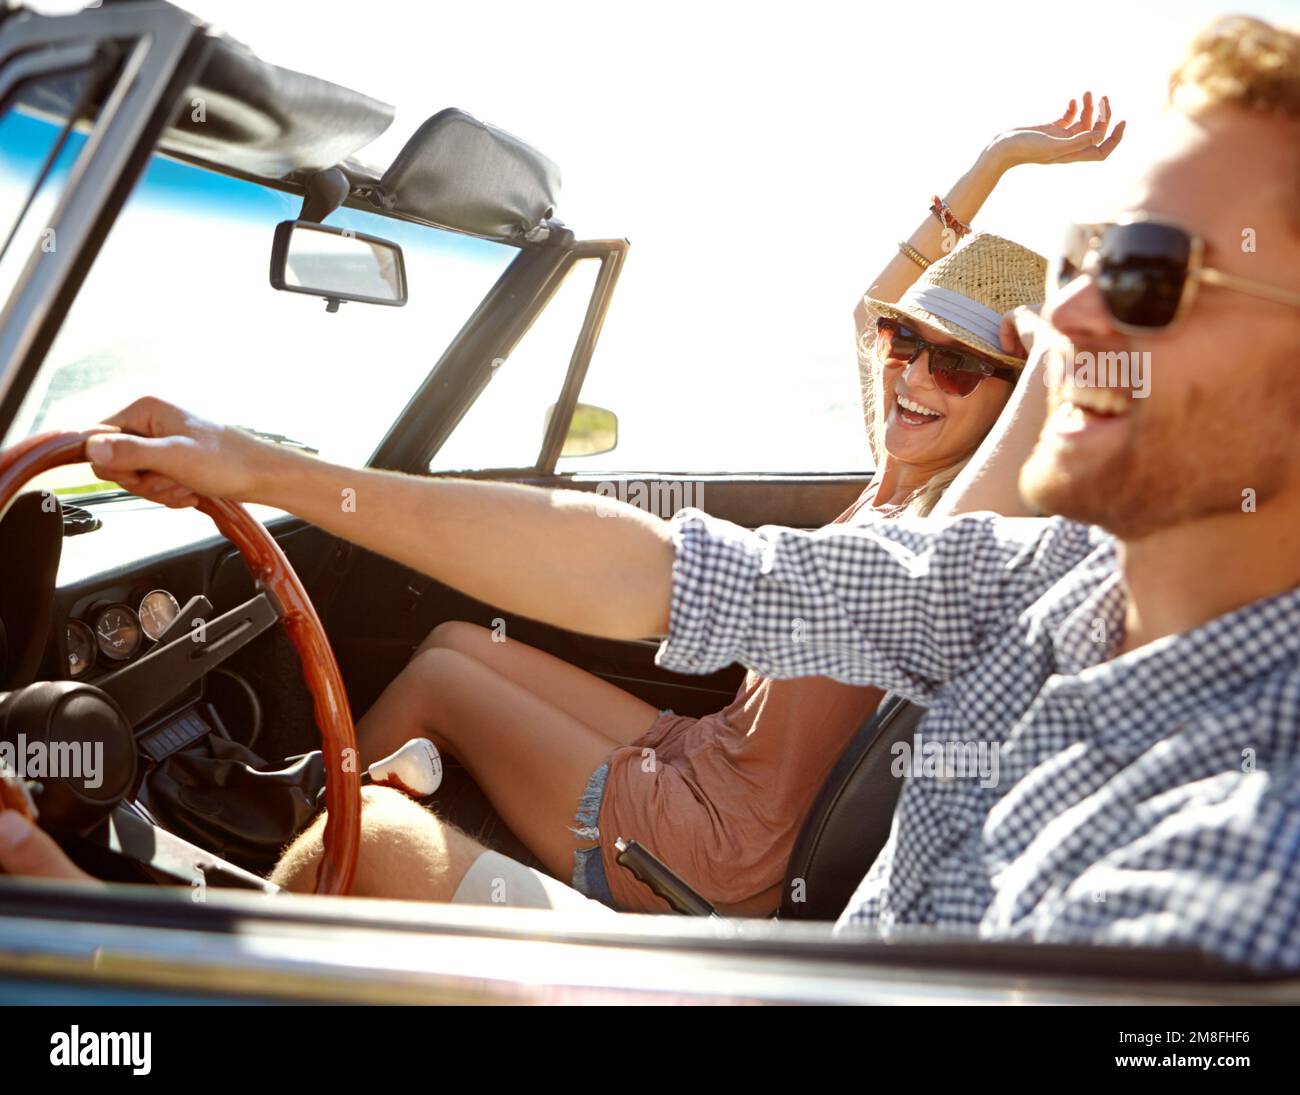 Car road trip, travel and laughing couple on bonding holiday adventure, transportation journey or fun summer vacation. Love flare, convertible Stock Photo